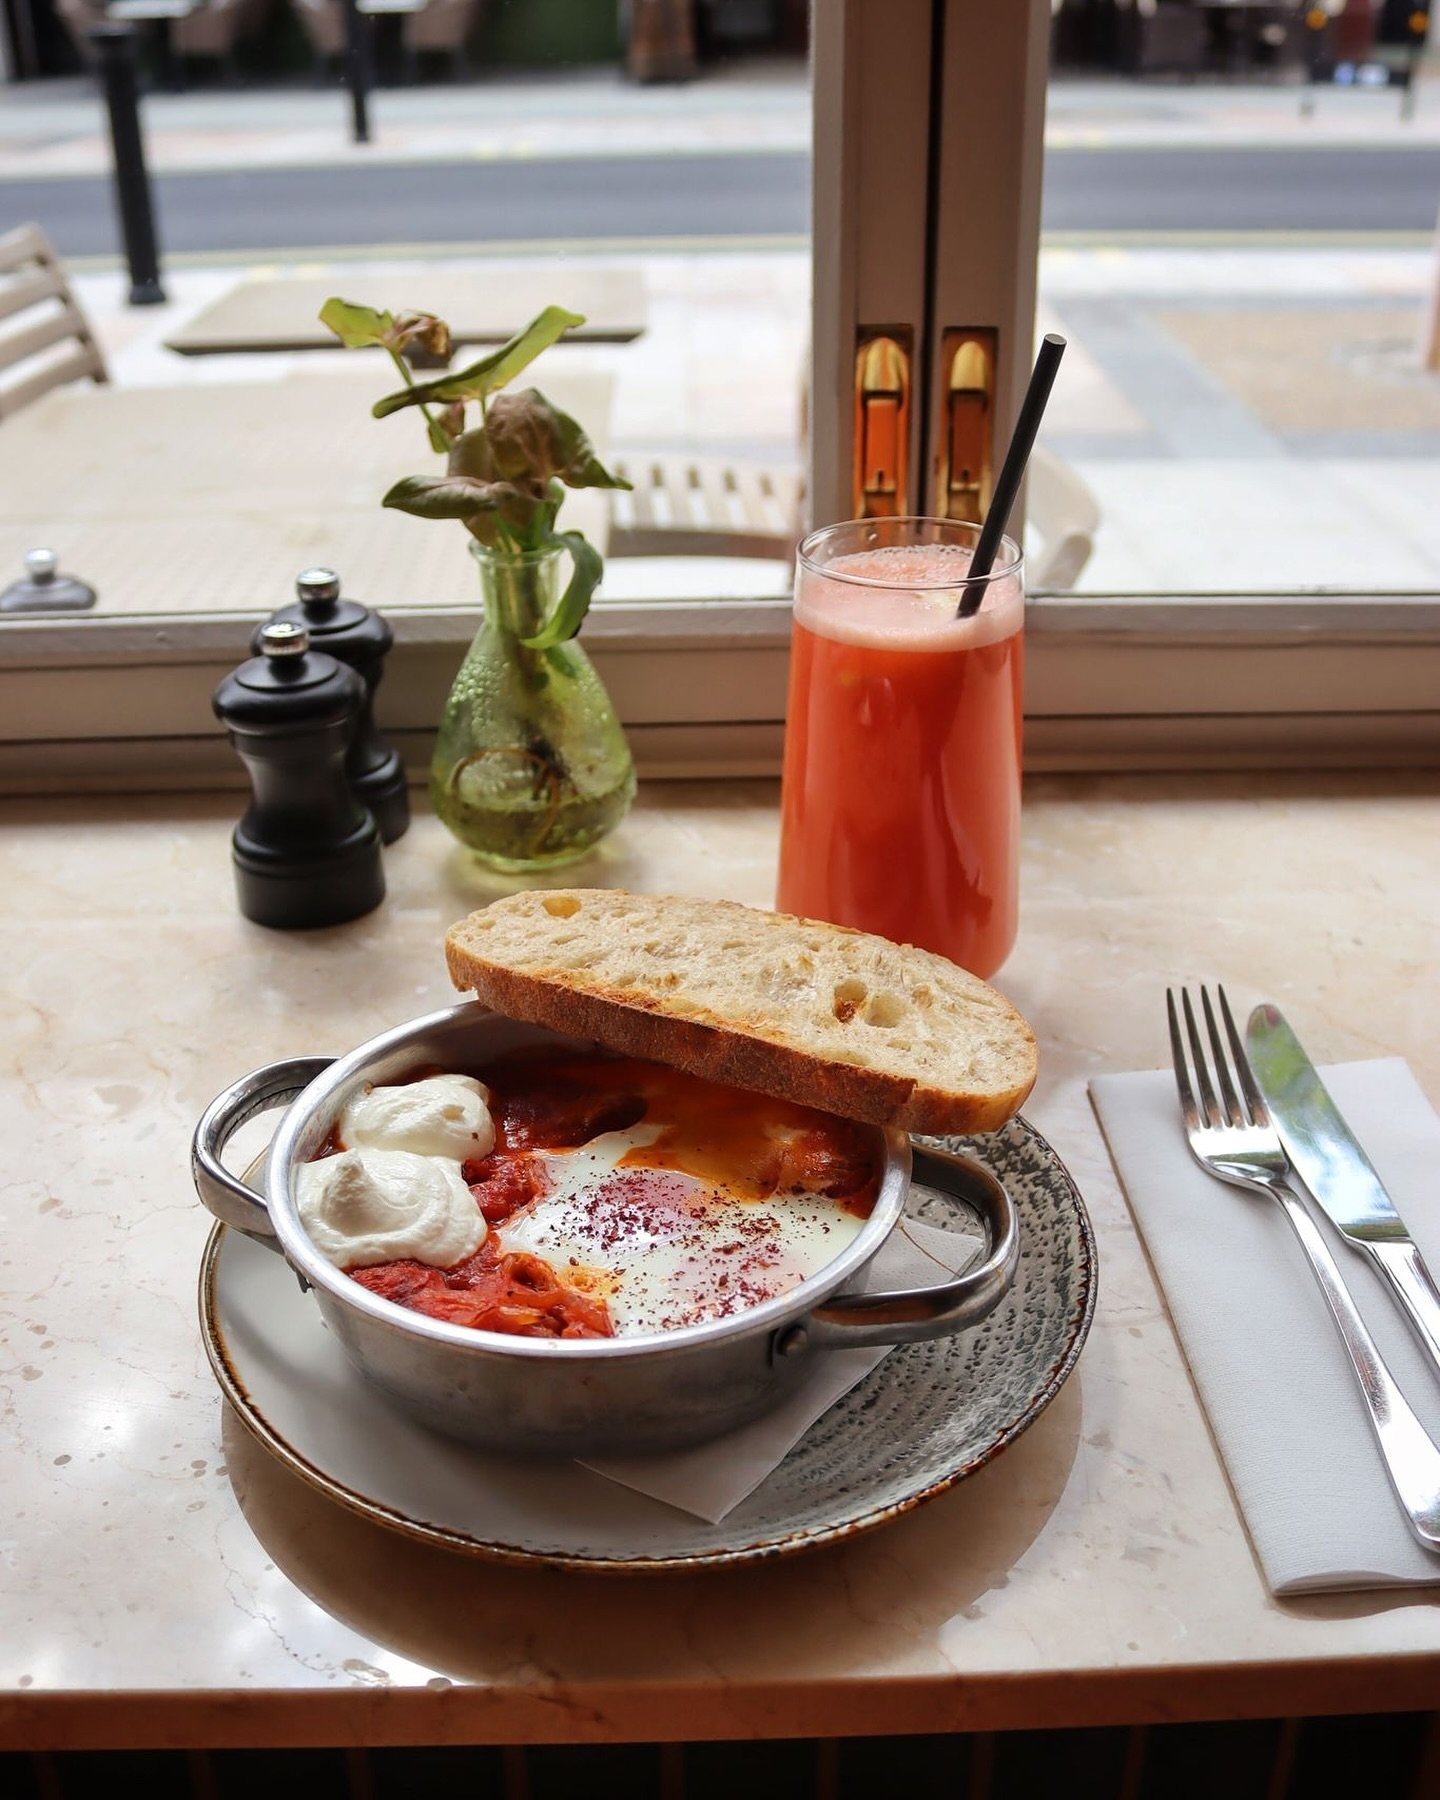 What&rsquo;s your weekend brunch go-to? We love our Shakshuka eggs with a freshly squeezed juice, enjoyed whilst watching @nw8stjohnswood go by!
.
.
.
.
#EnglandsGrace #sunday #sundaybrunch #sundayvibes #brunch #breakfast #shakshuka #stjohnswood #foo